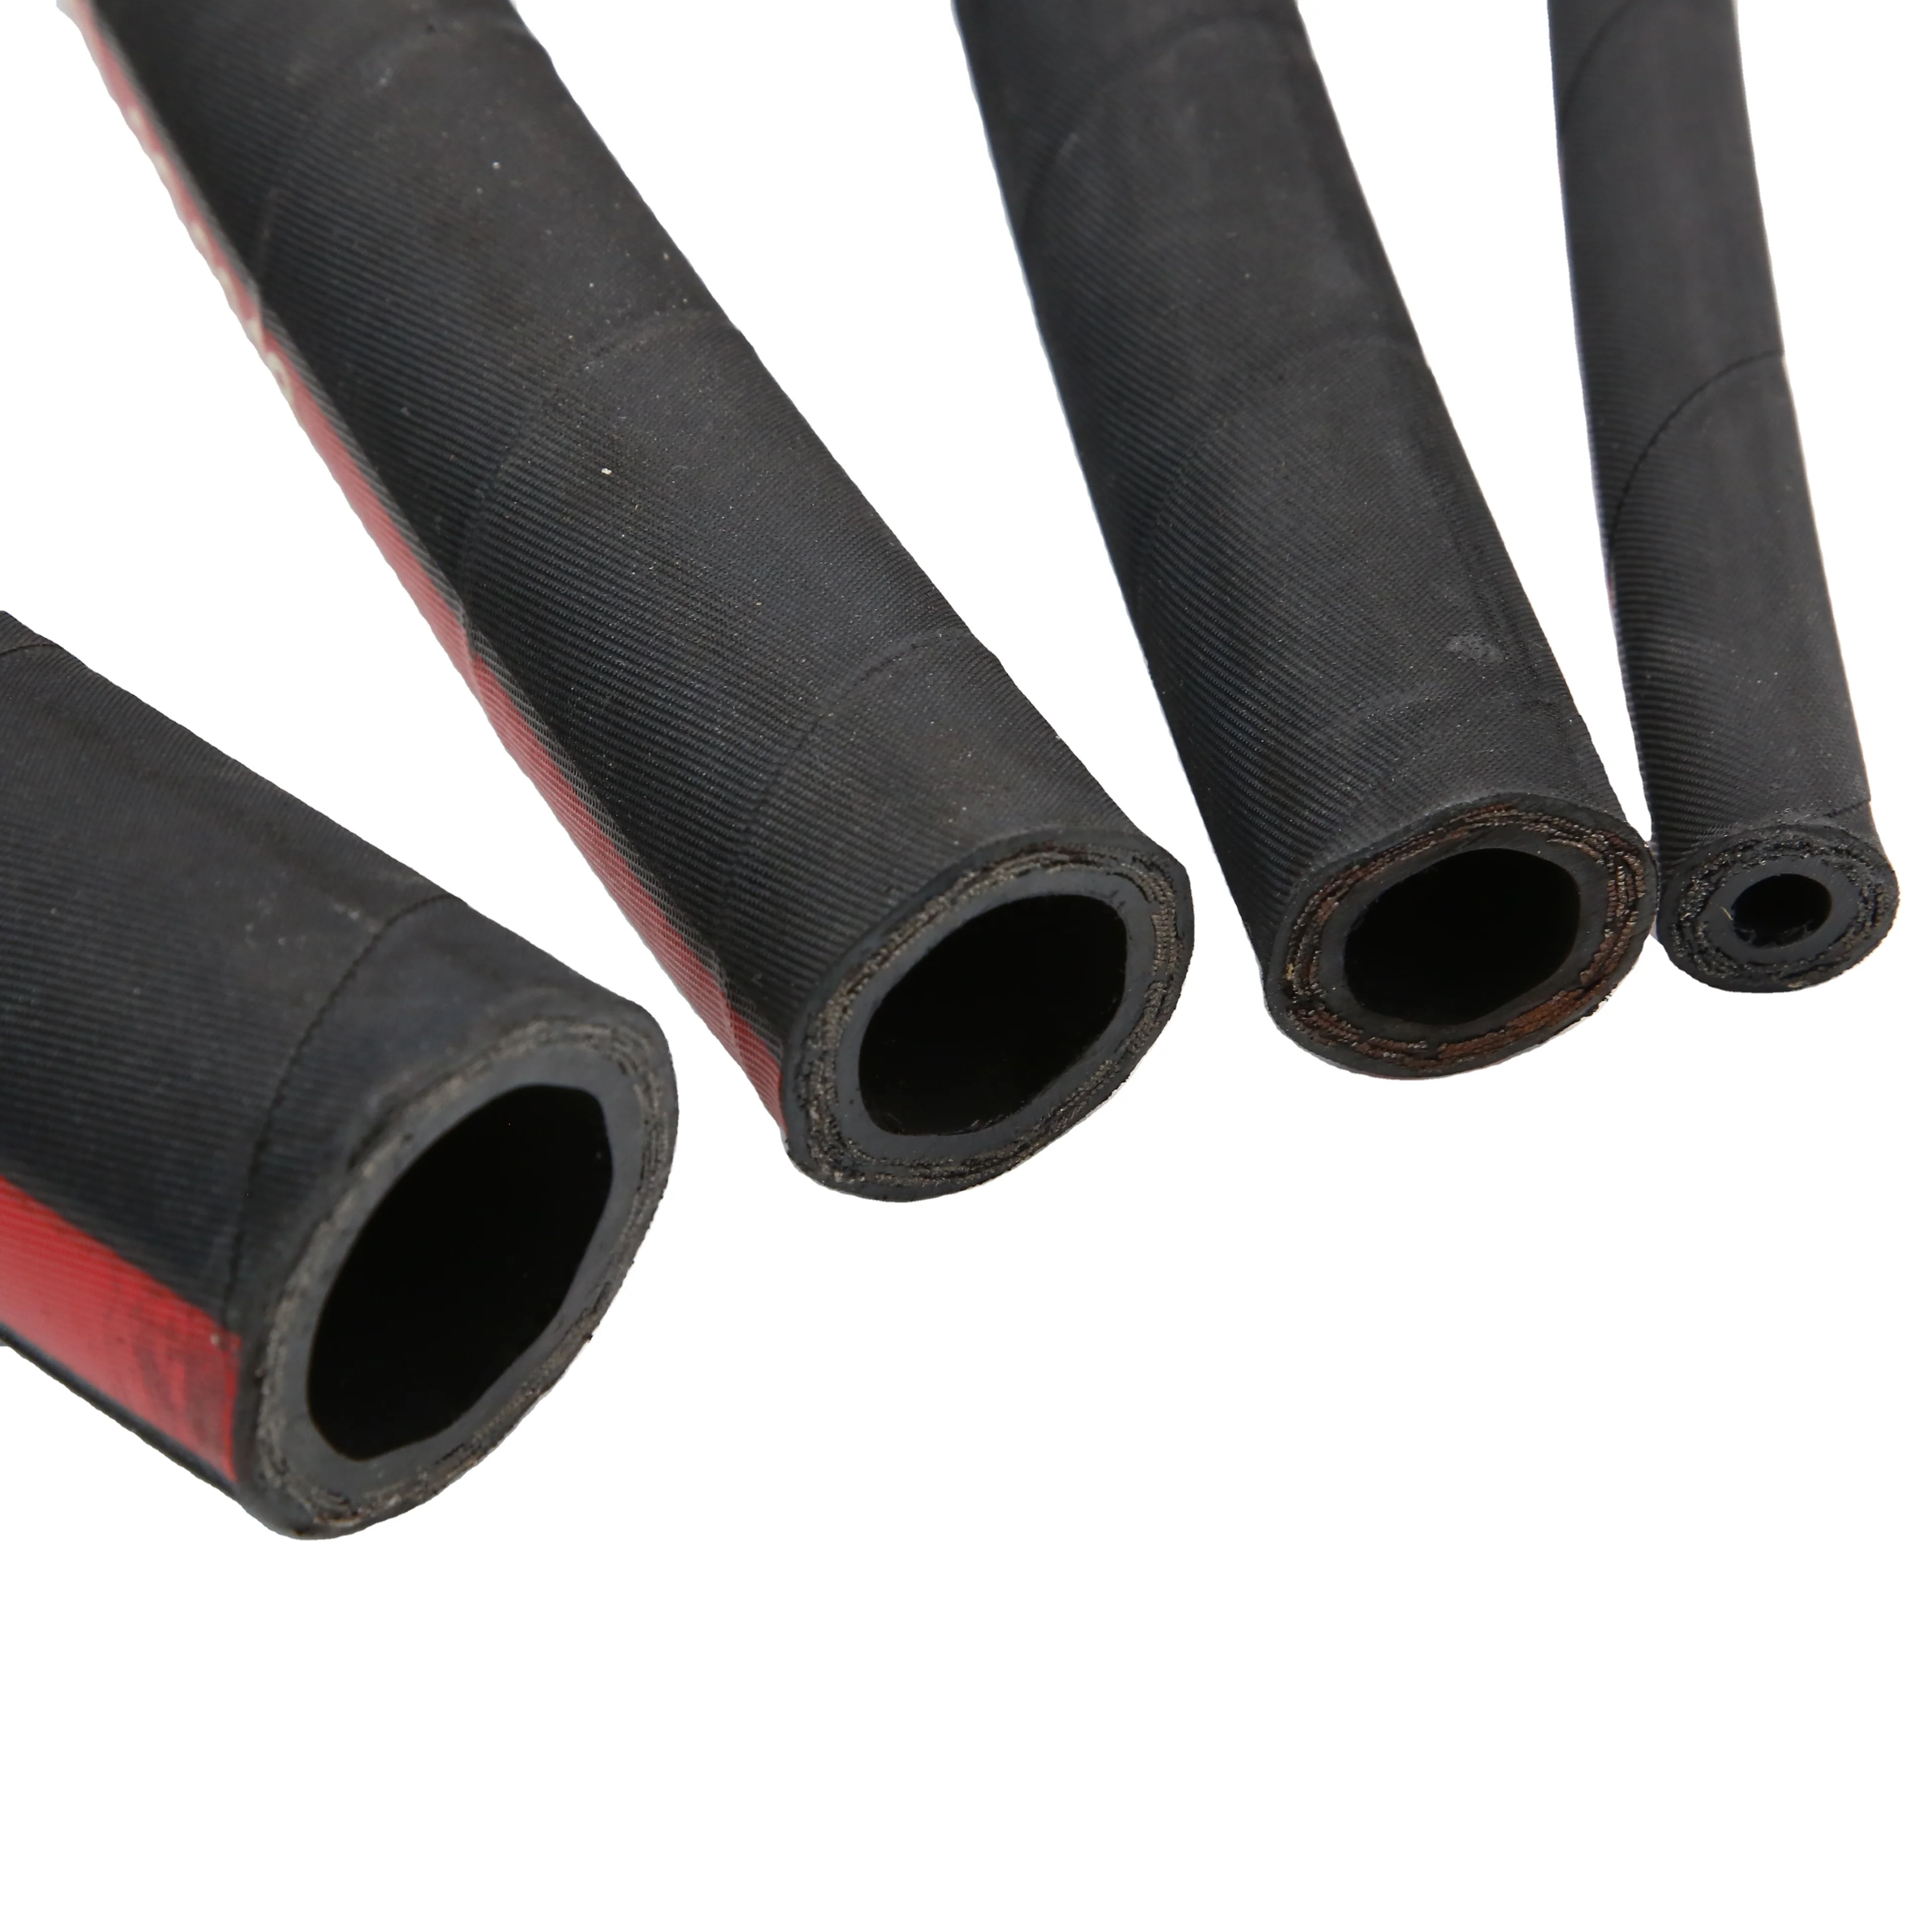 compressed air rubber hose 1 inch 2 inch 3 inch 4 inch 5 inch 6 inch oil resistant corrugated concrete rubber hoses